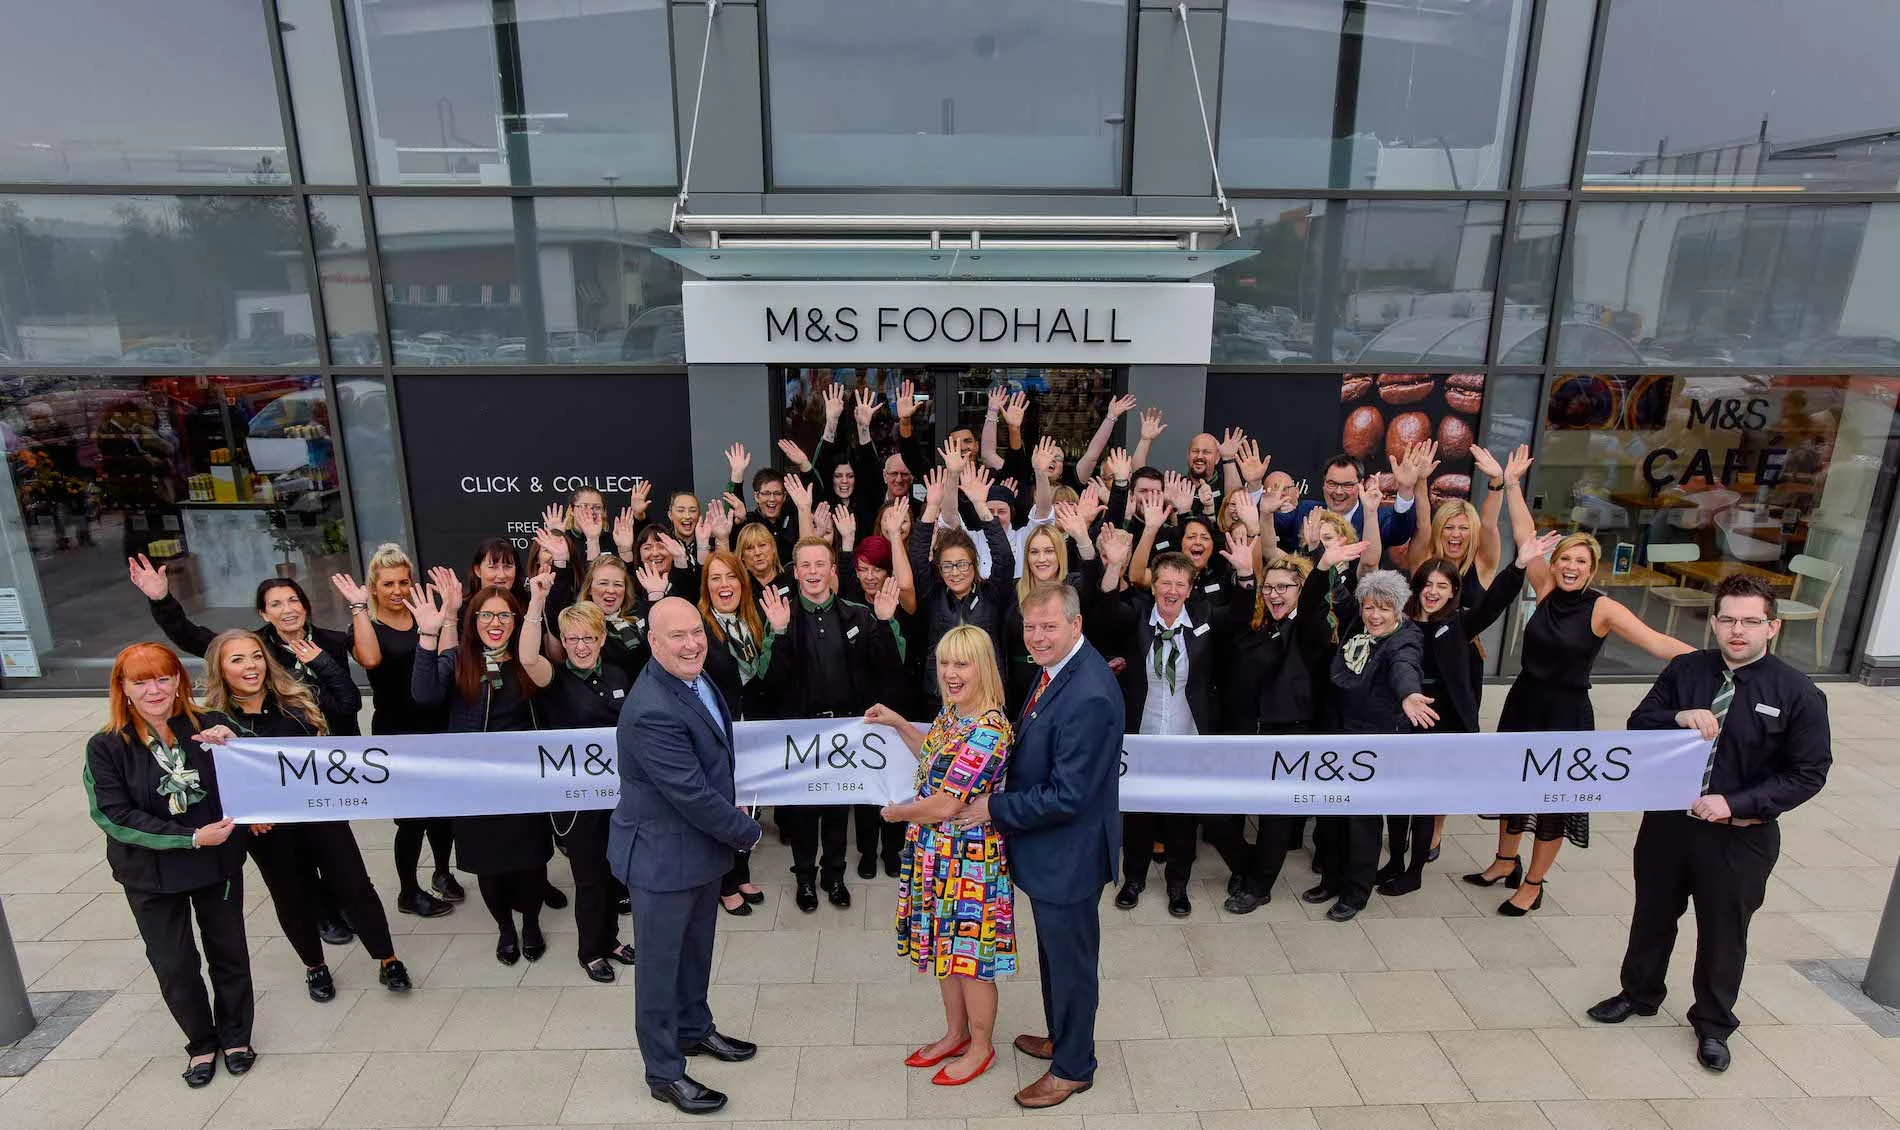 The brand new M&S Foodhall. 